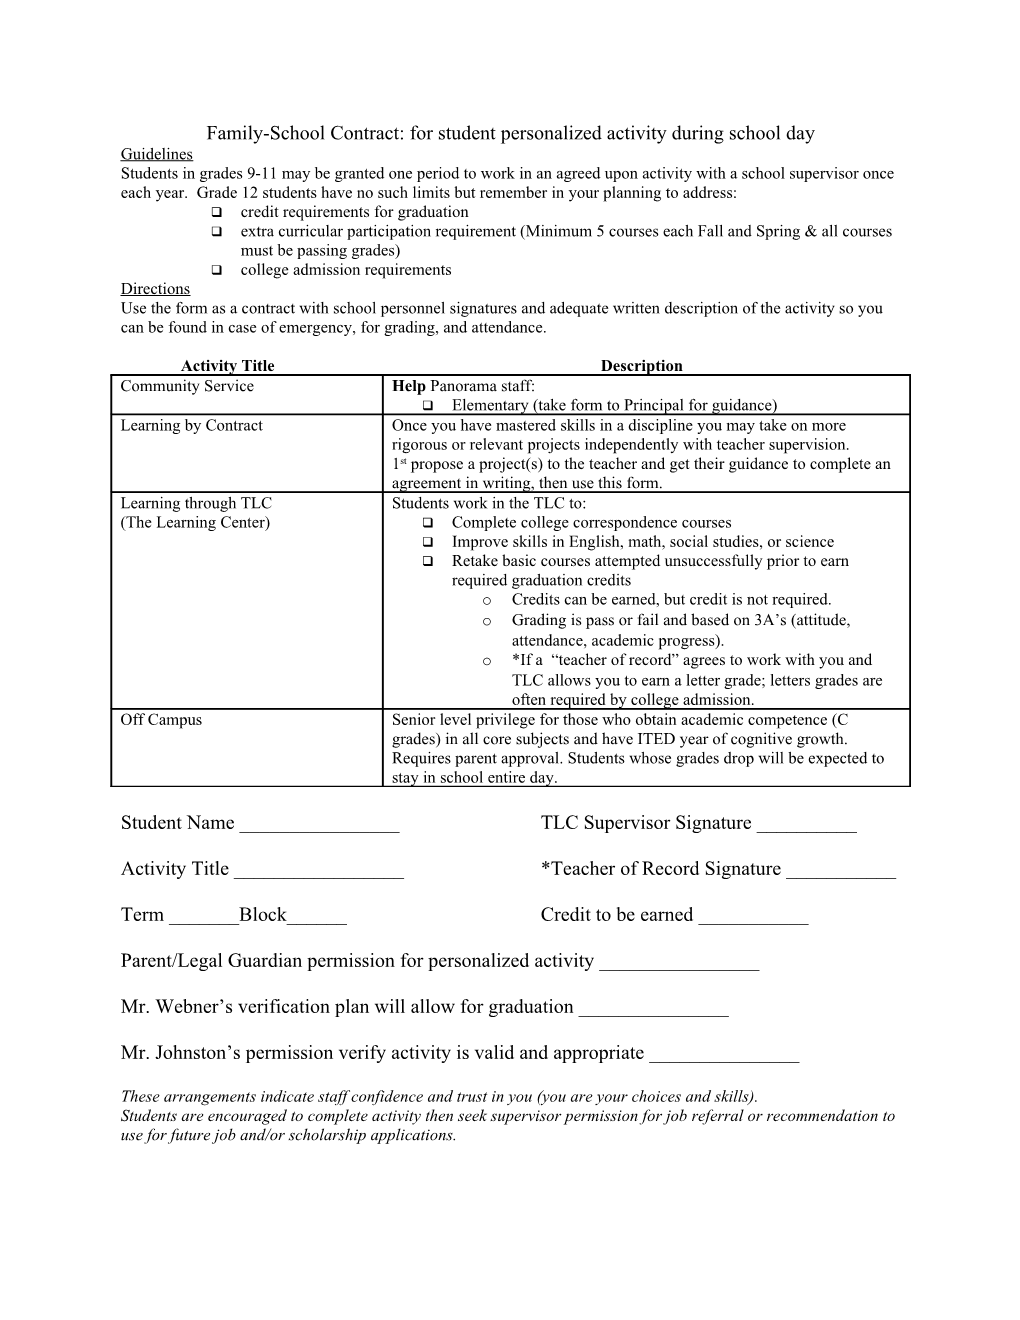 Student-School Contract: for Personalized Activity During School Day